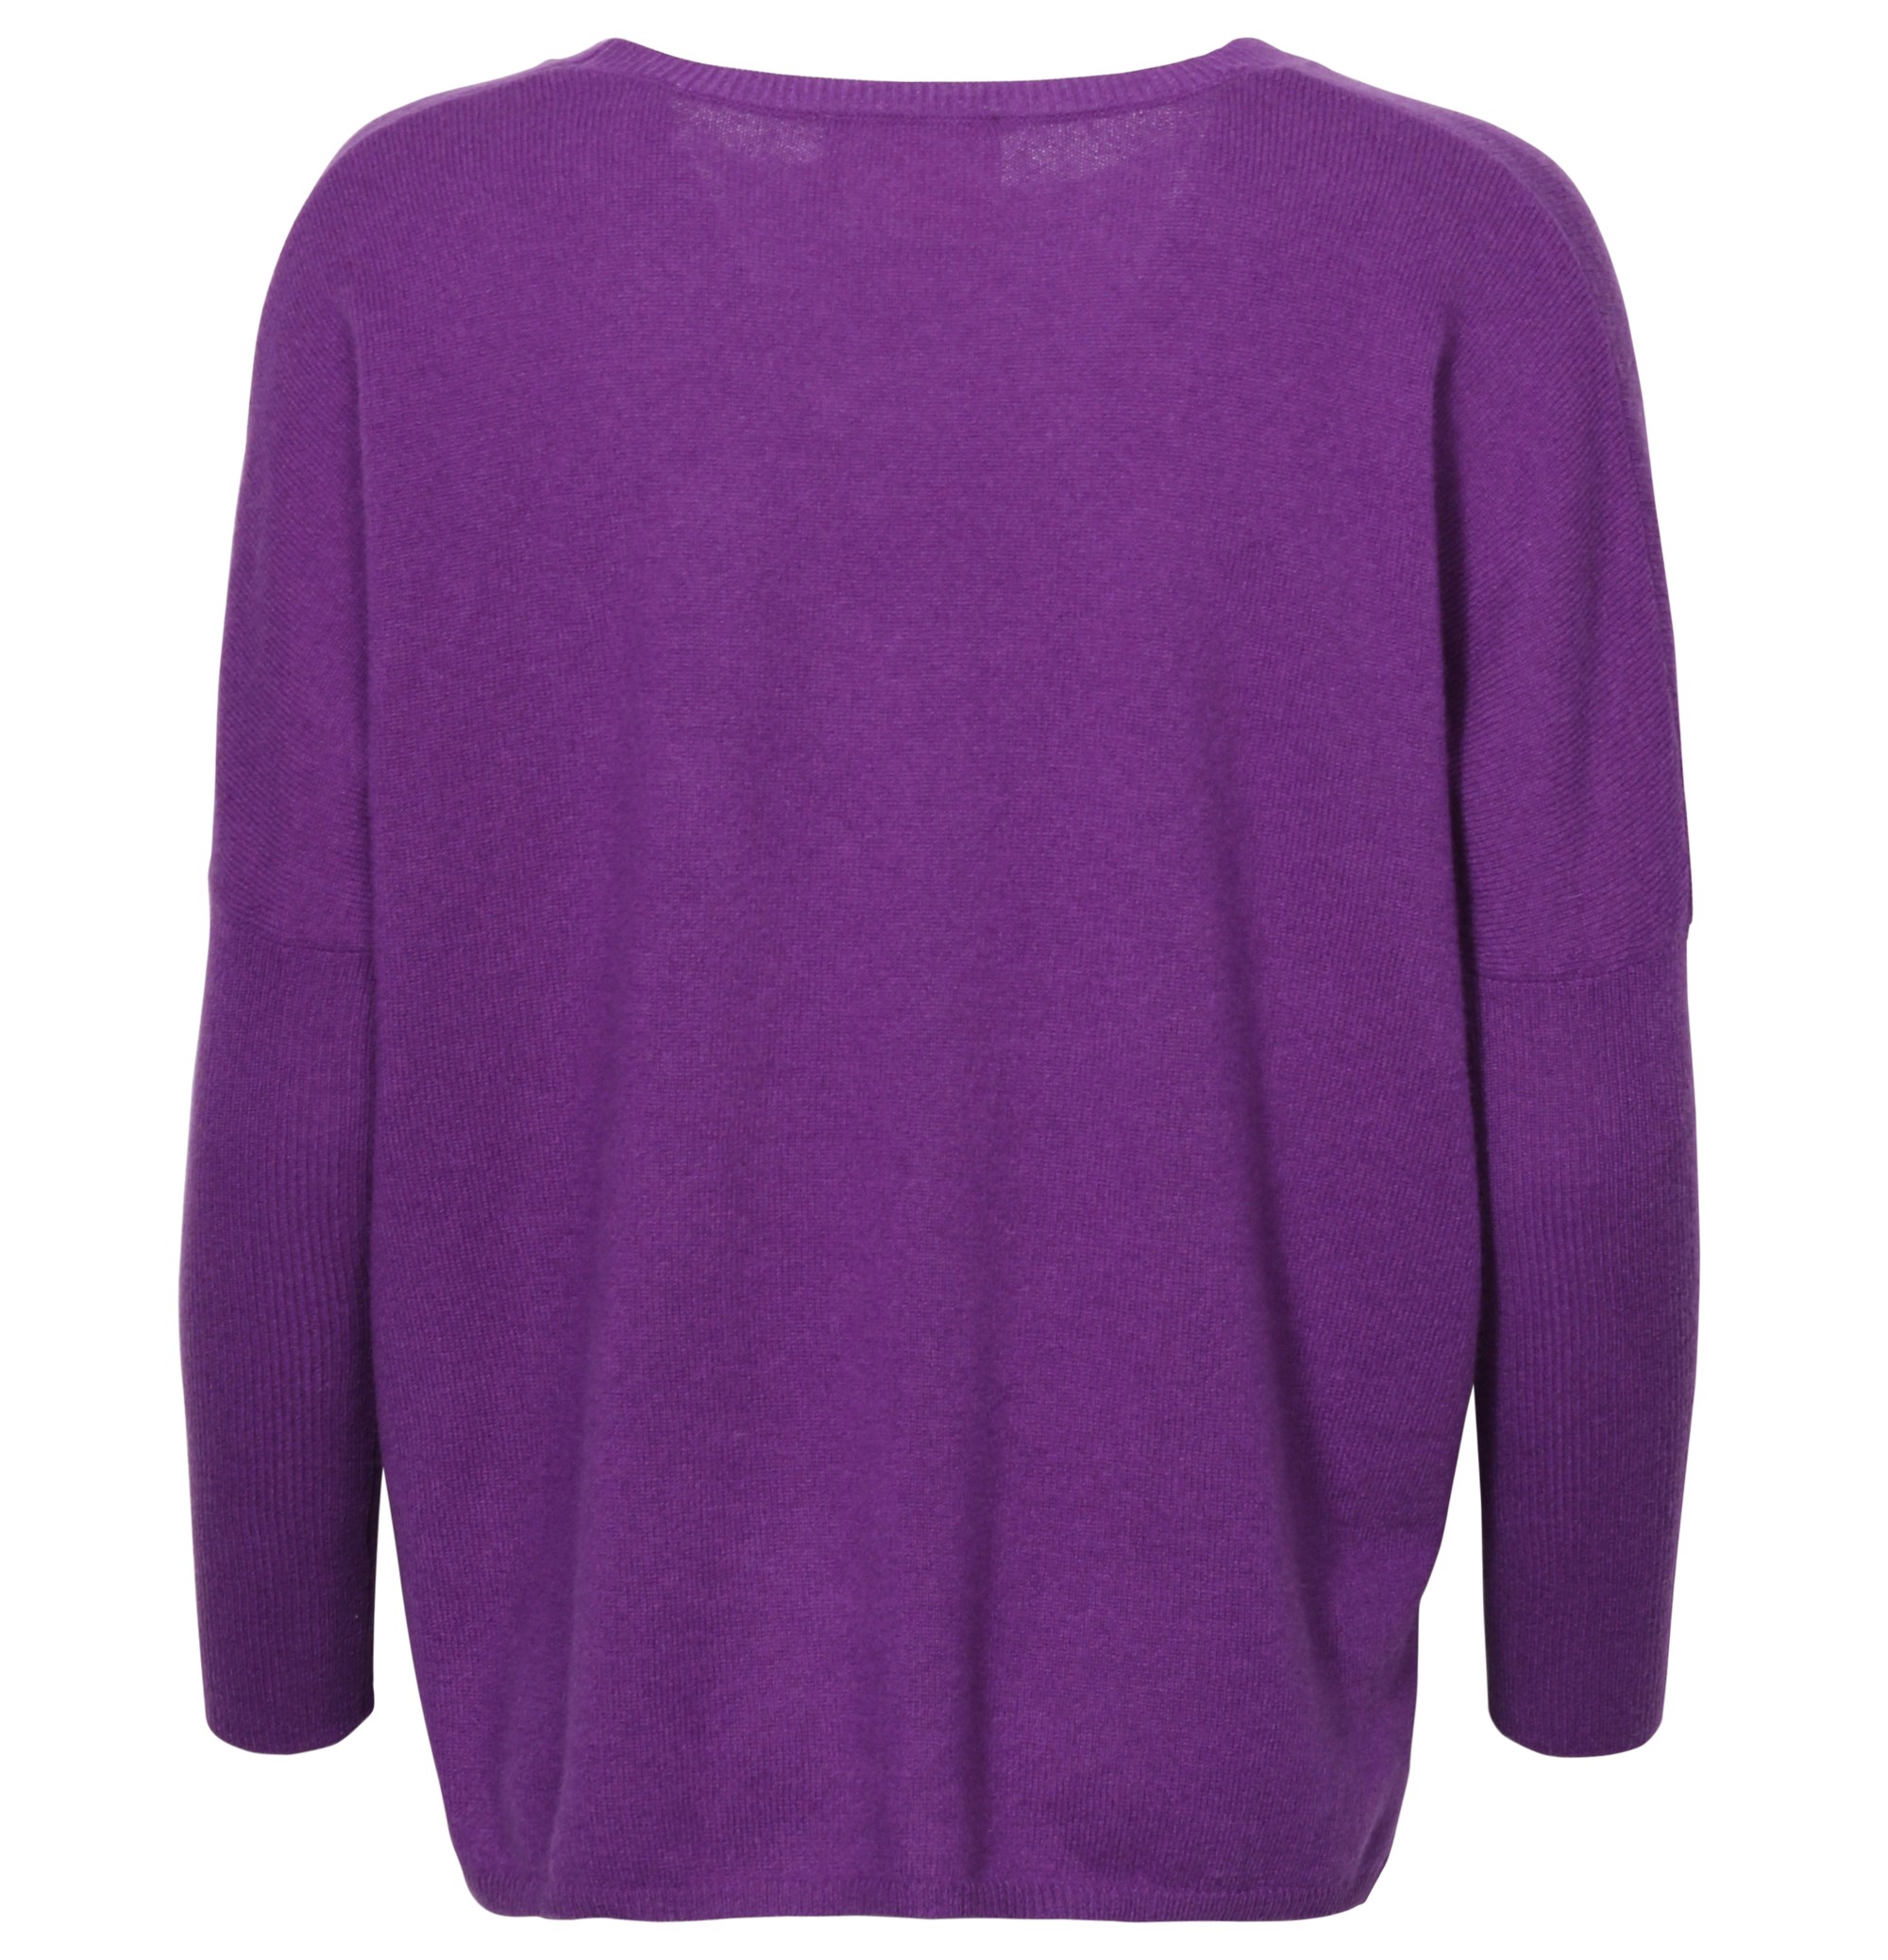 ABSOLUT CASHMERE Poncho Sweater Astrid in Lilac